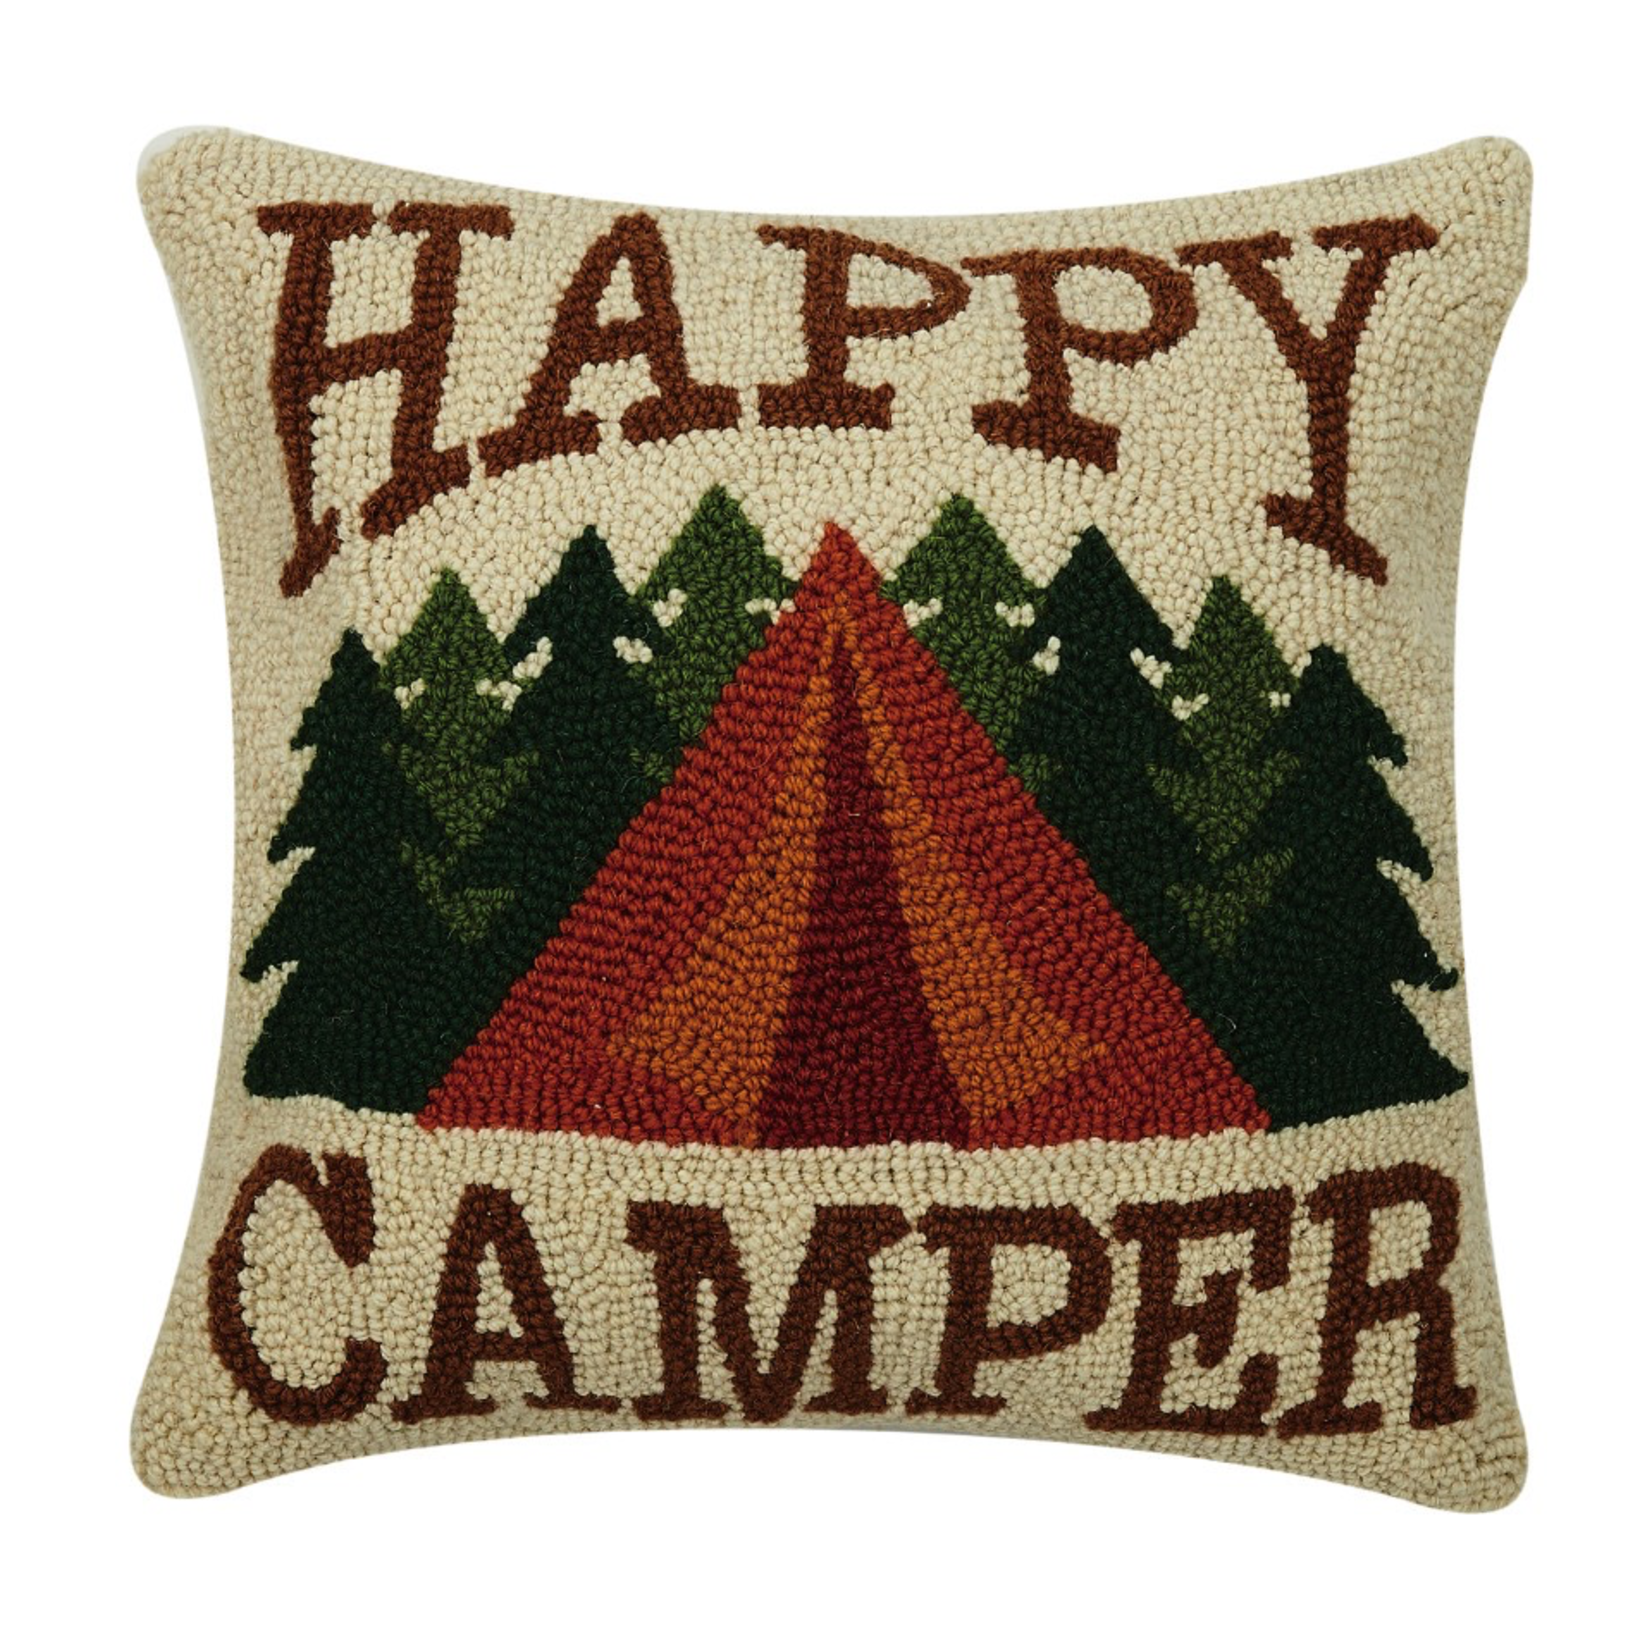 Pillows - Hooked Happy Camper